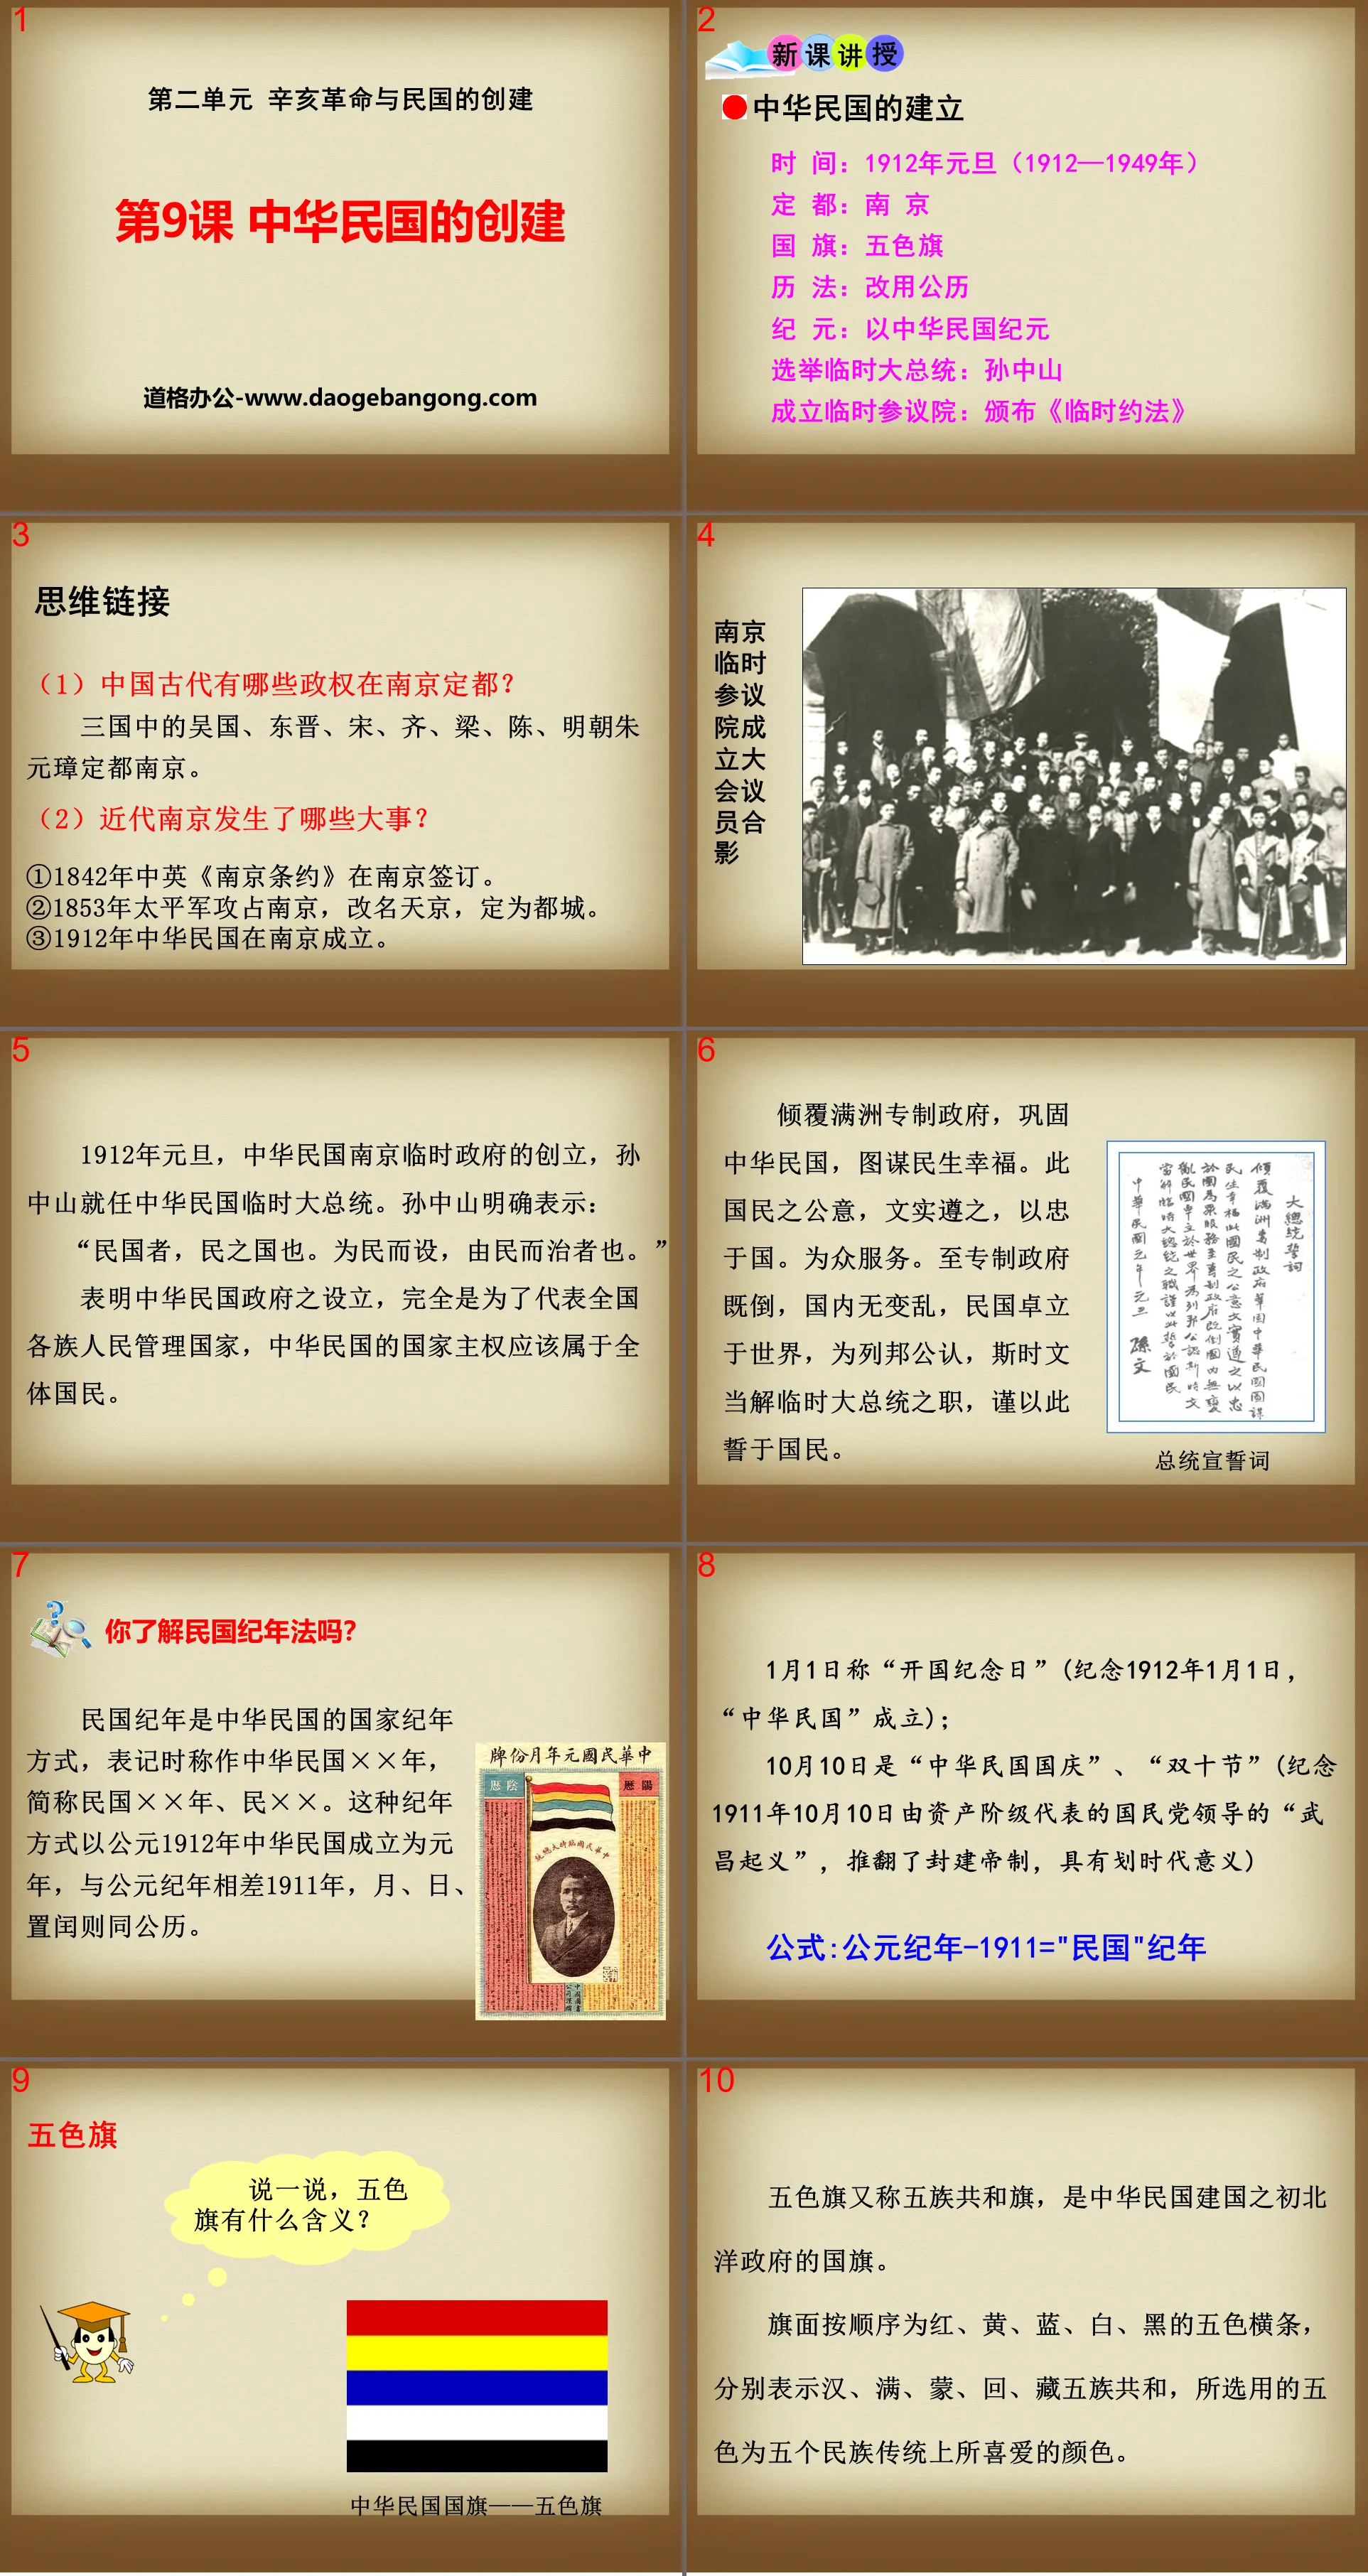 "The Creation of the Republic of China" Revolution of 1911 and the Creation of the Republic of China PPT courseware